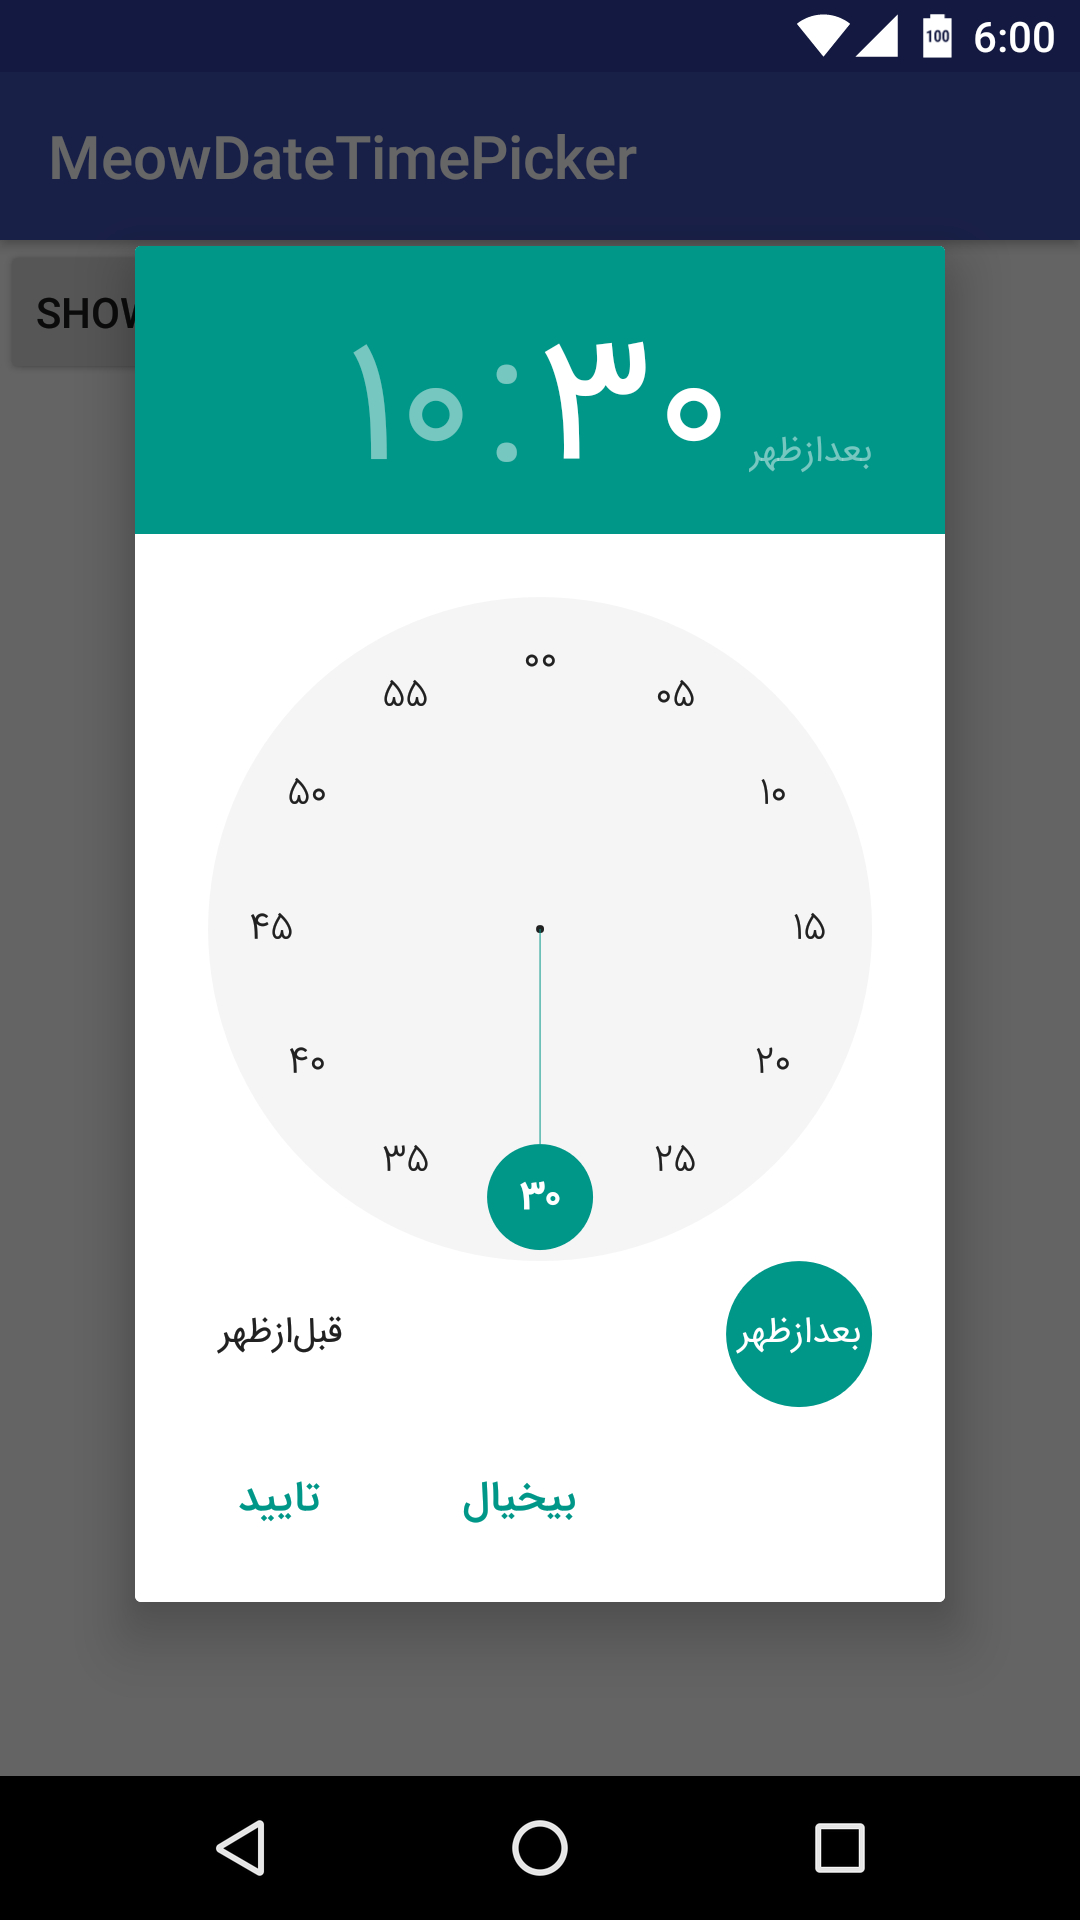 The Android Arsenal  Date &amp; Time Pickers  Meowdatetimepicker intended for Range Picker Android